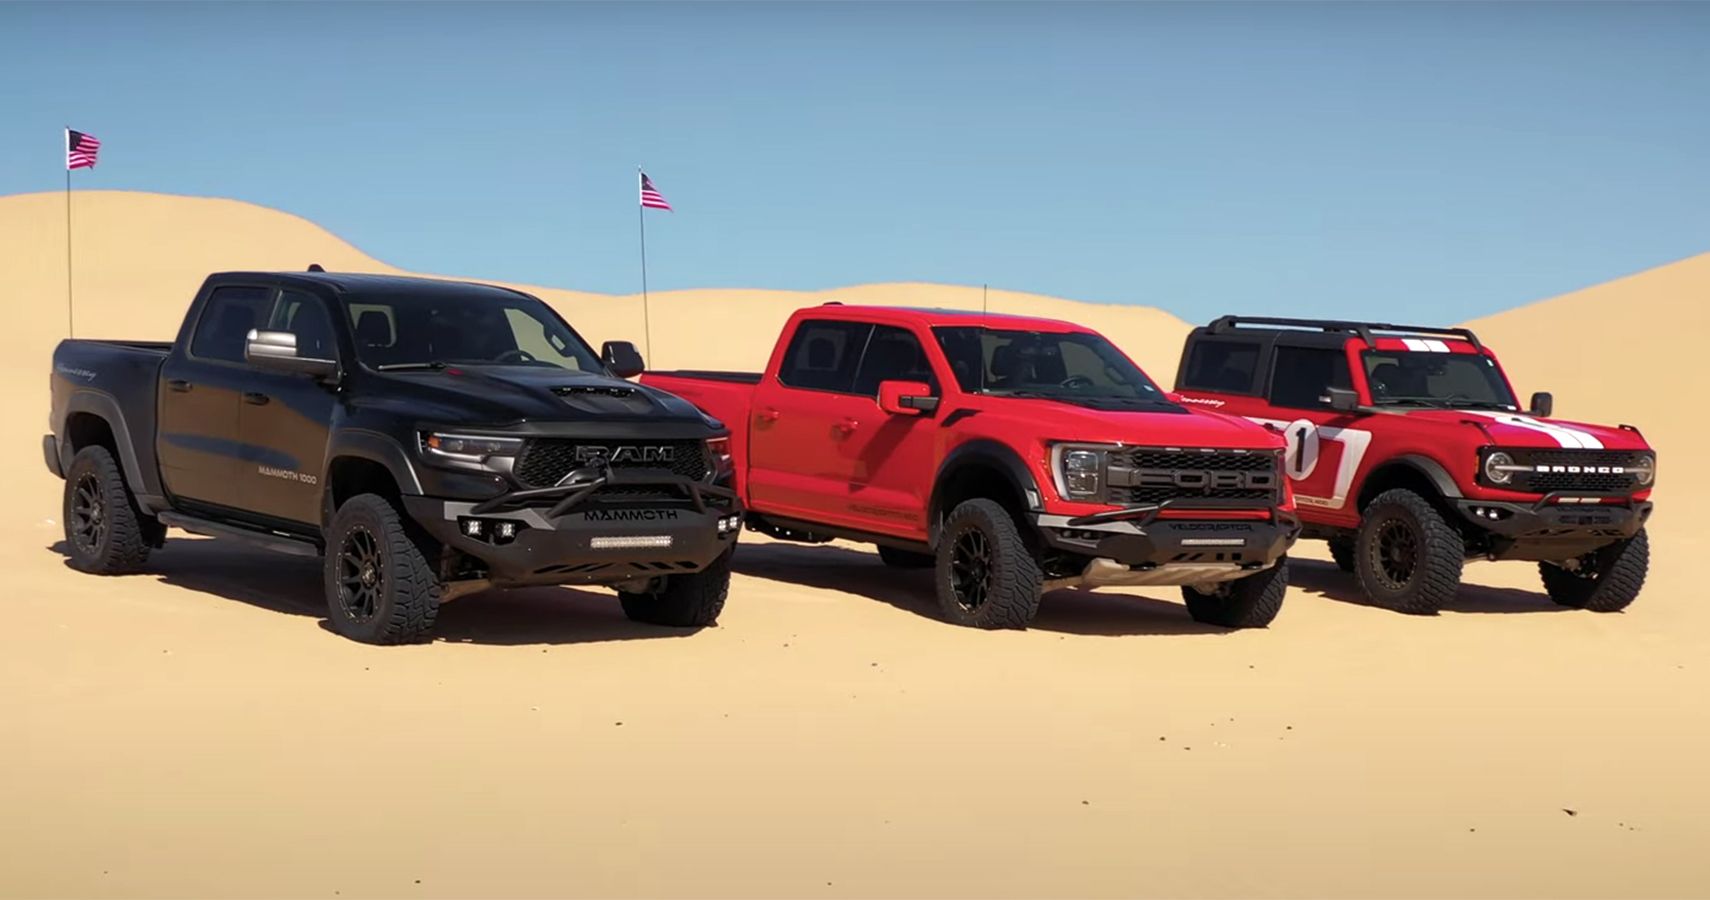 Hennessey: Ram TRX Ford Raptor Ford Bronco on sand dunes, front view of all in a line